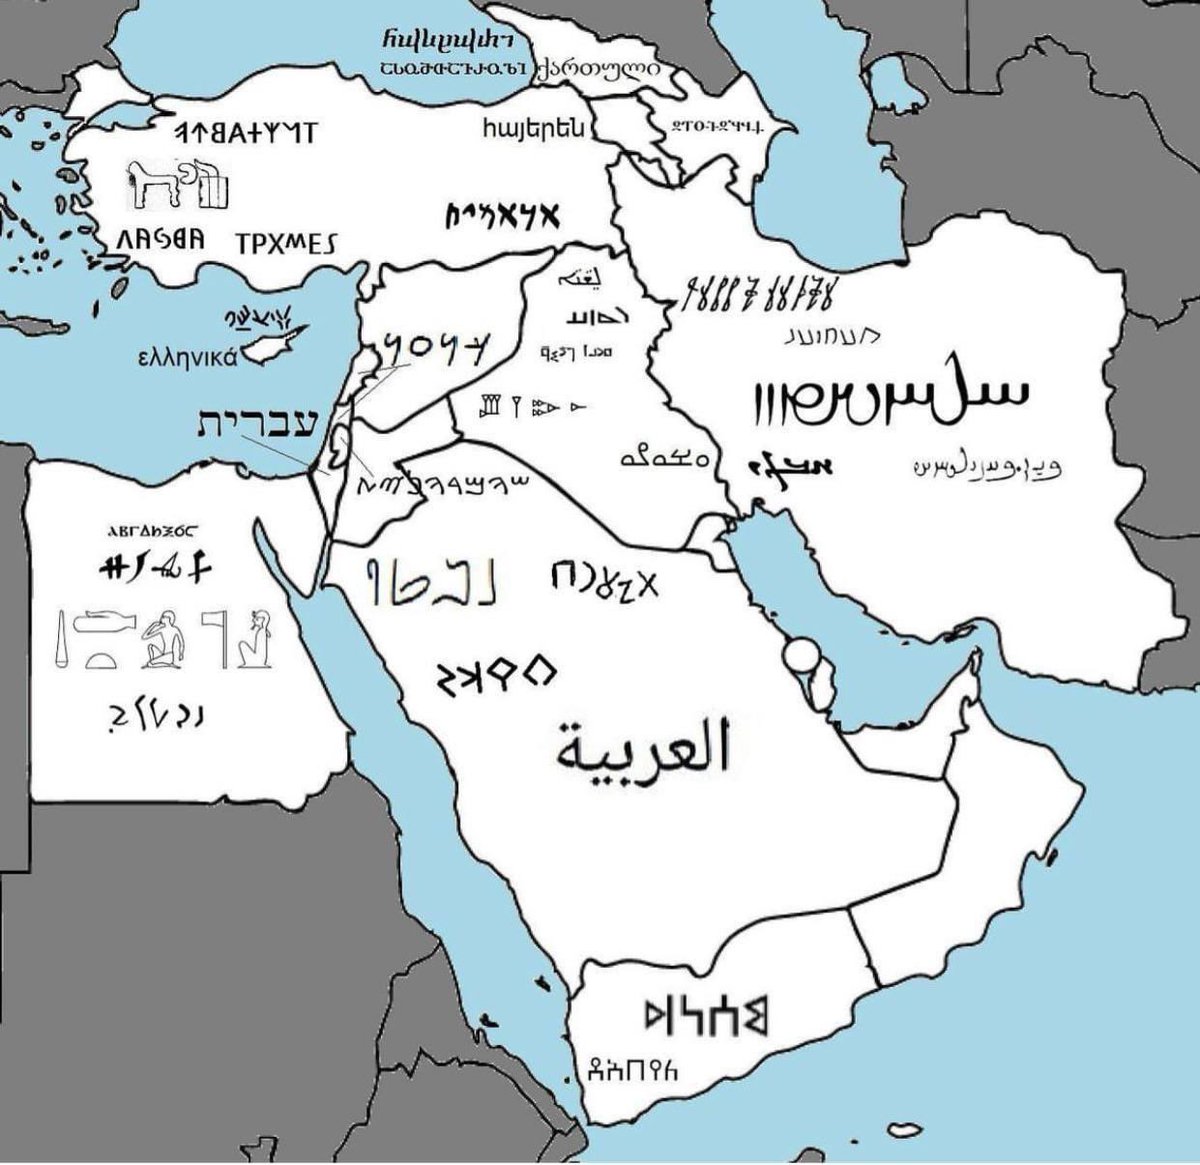 Evolution of Scripts in the Middle East: A Historical Overview

#history #script #evolution #israel #astrogeomanity #periodictableofevolution